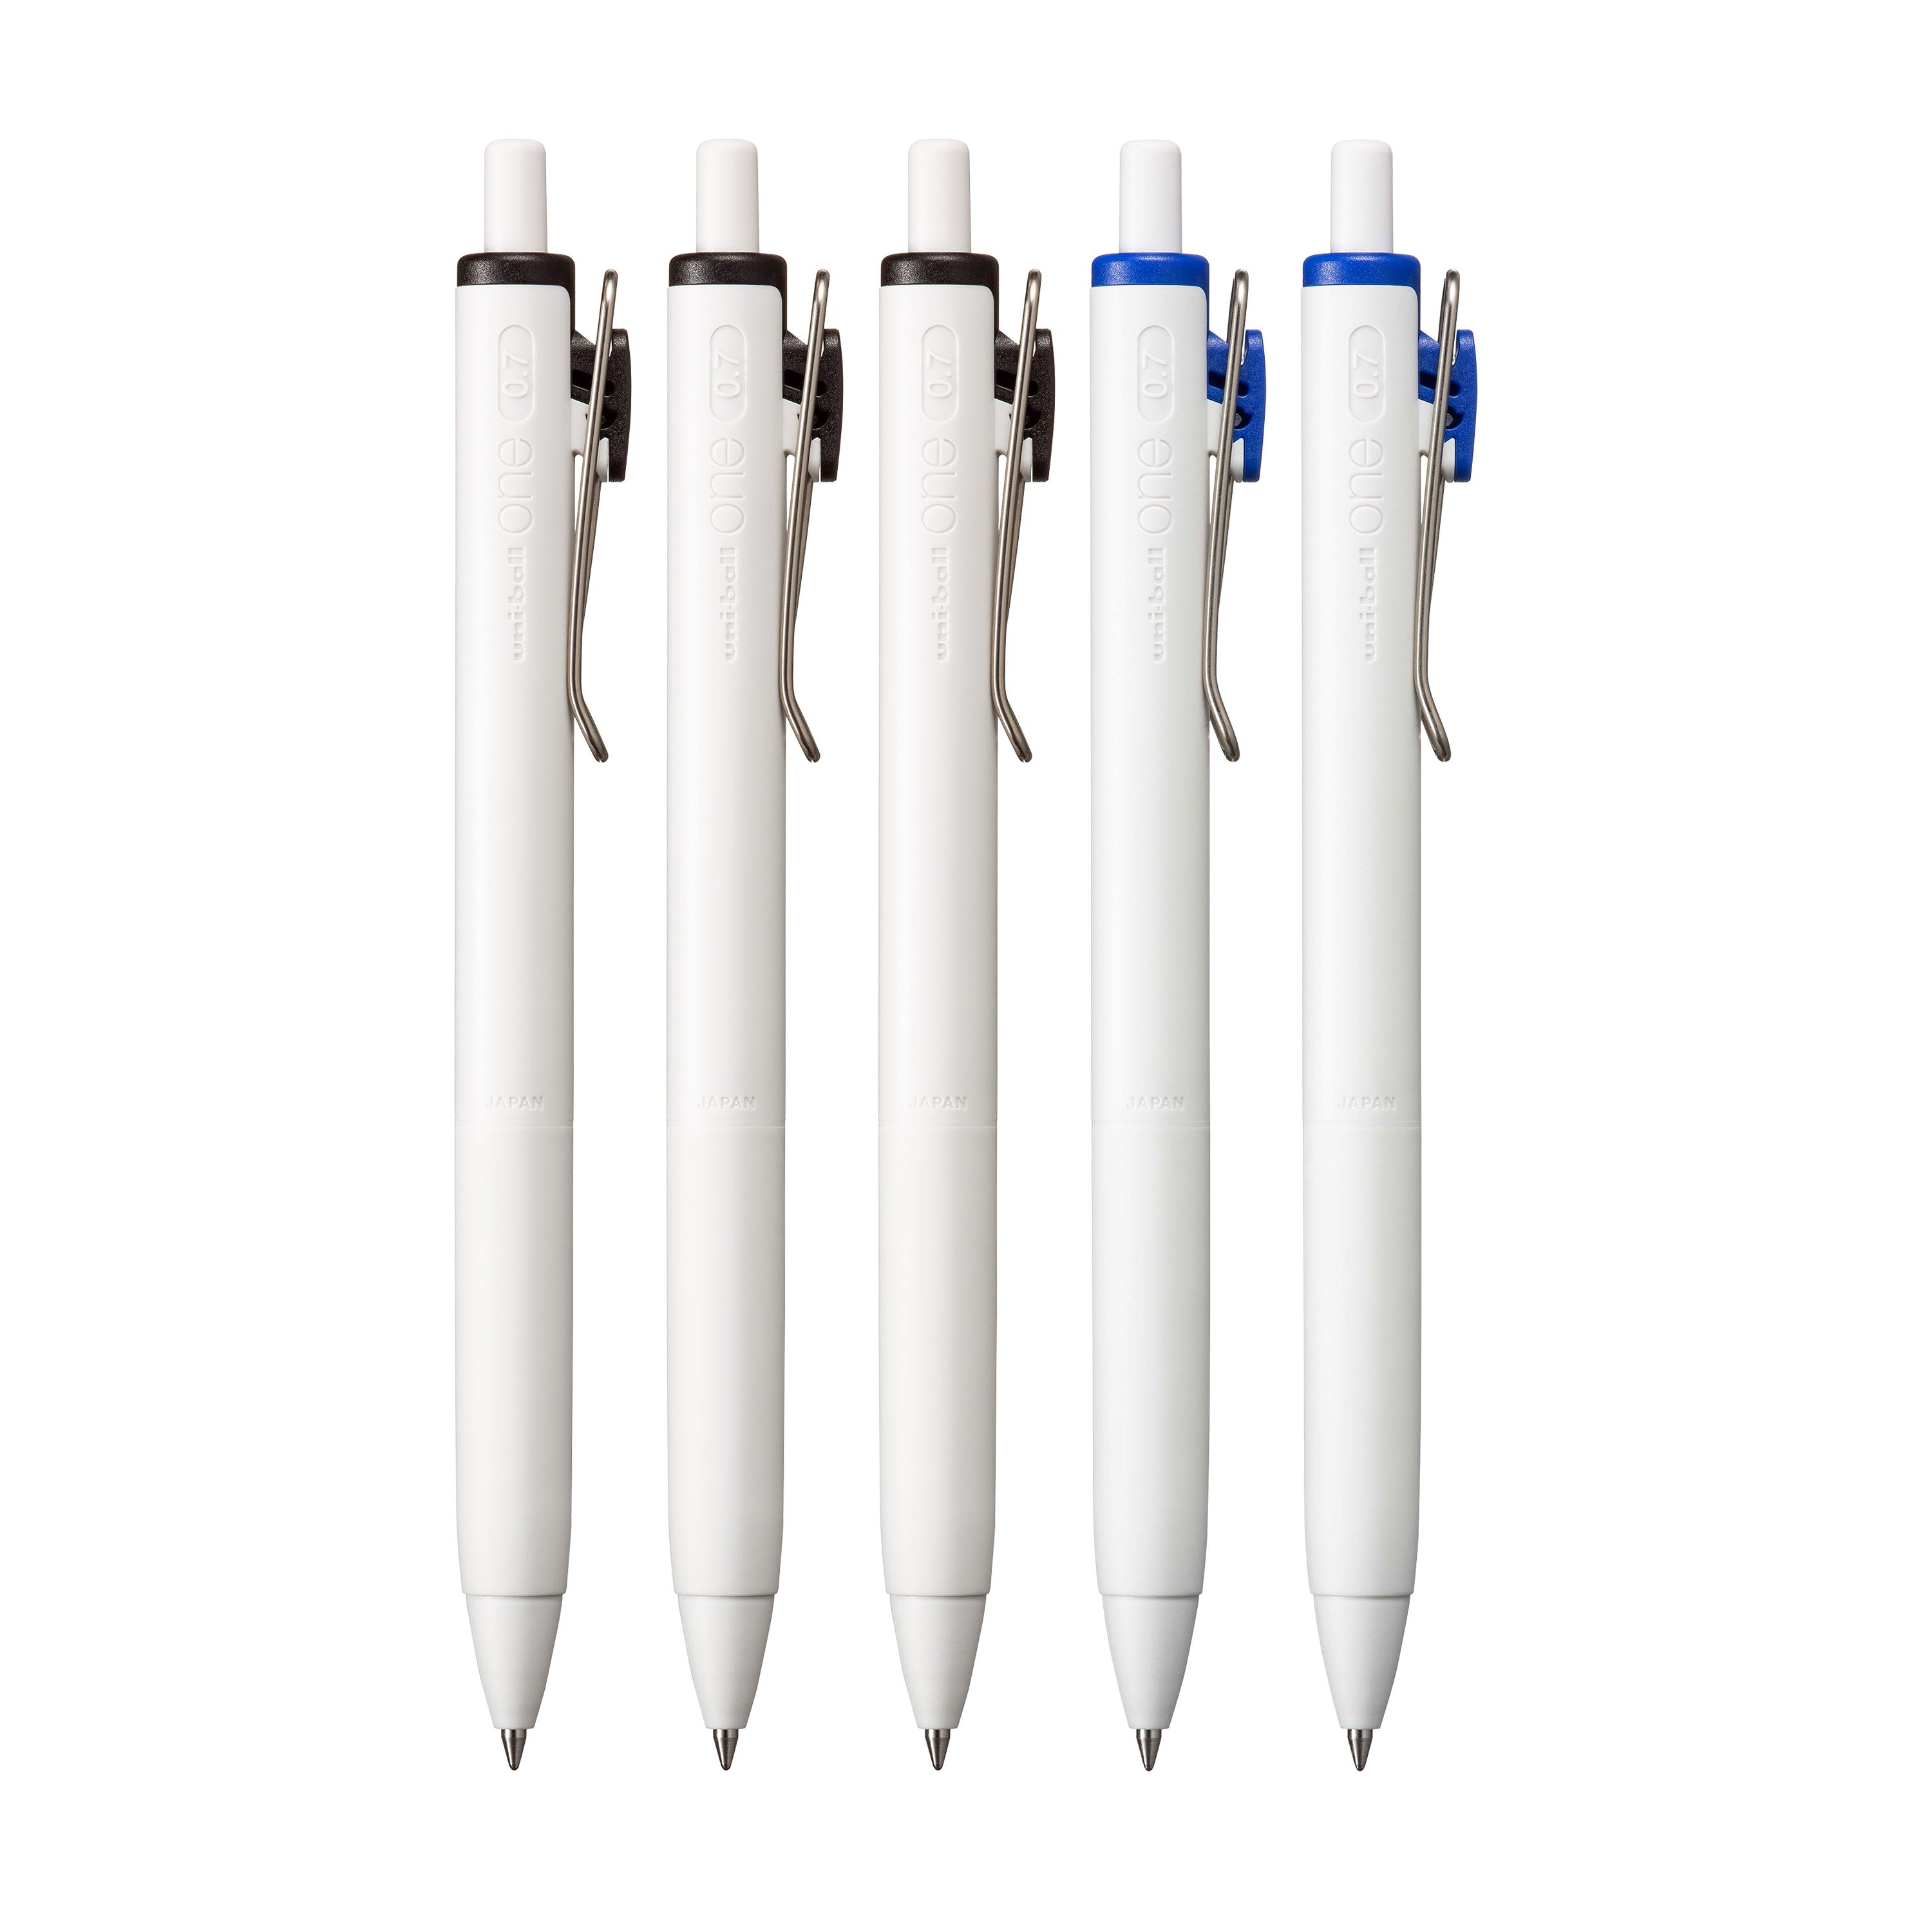 uniball™ one Retractable Gel Pens, Medium Point (0.7mm), Black and Blue Ink, 5 Pack